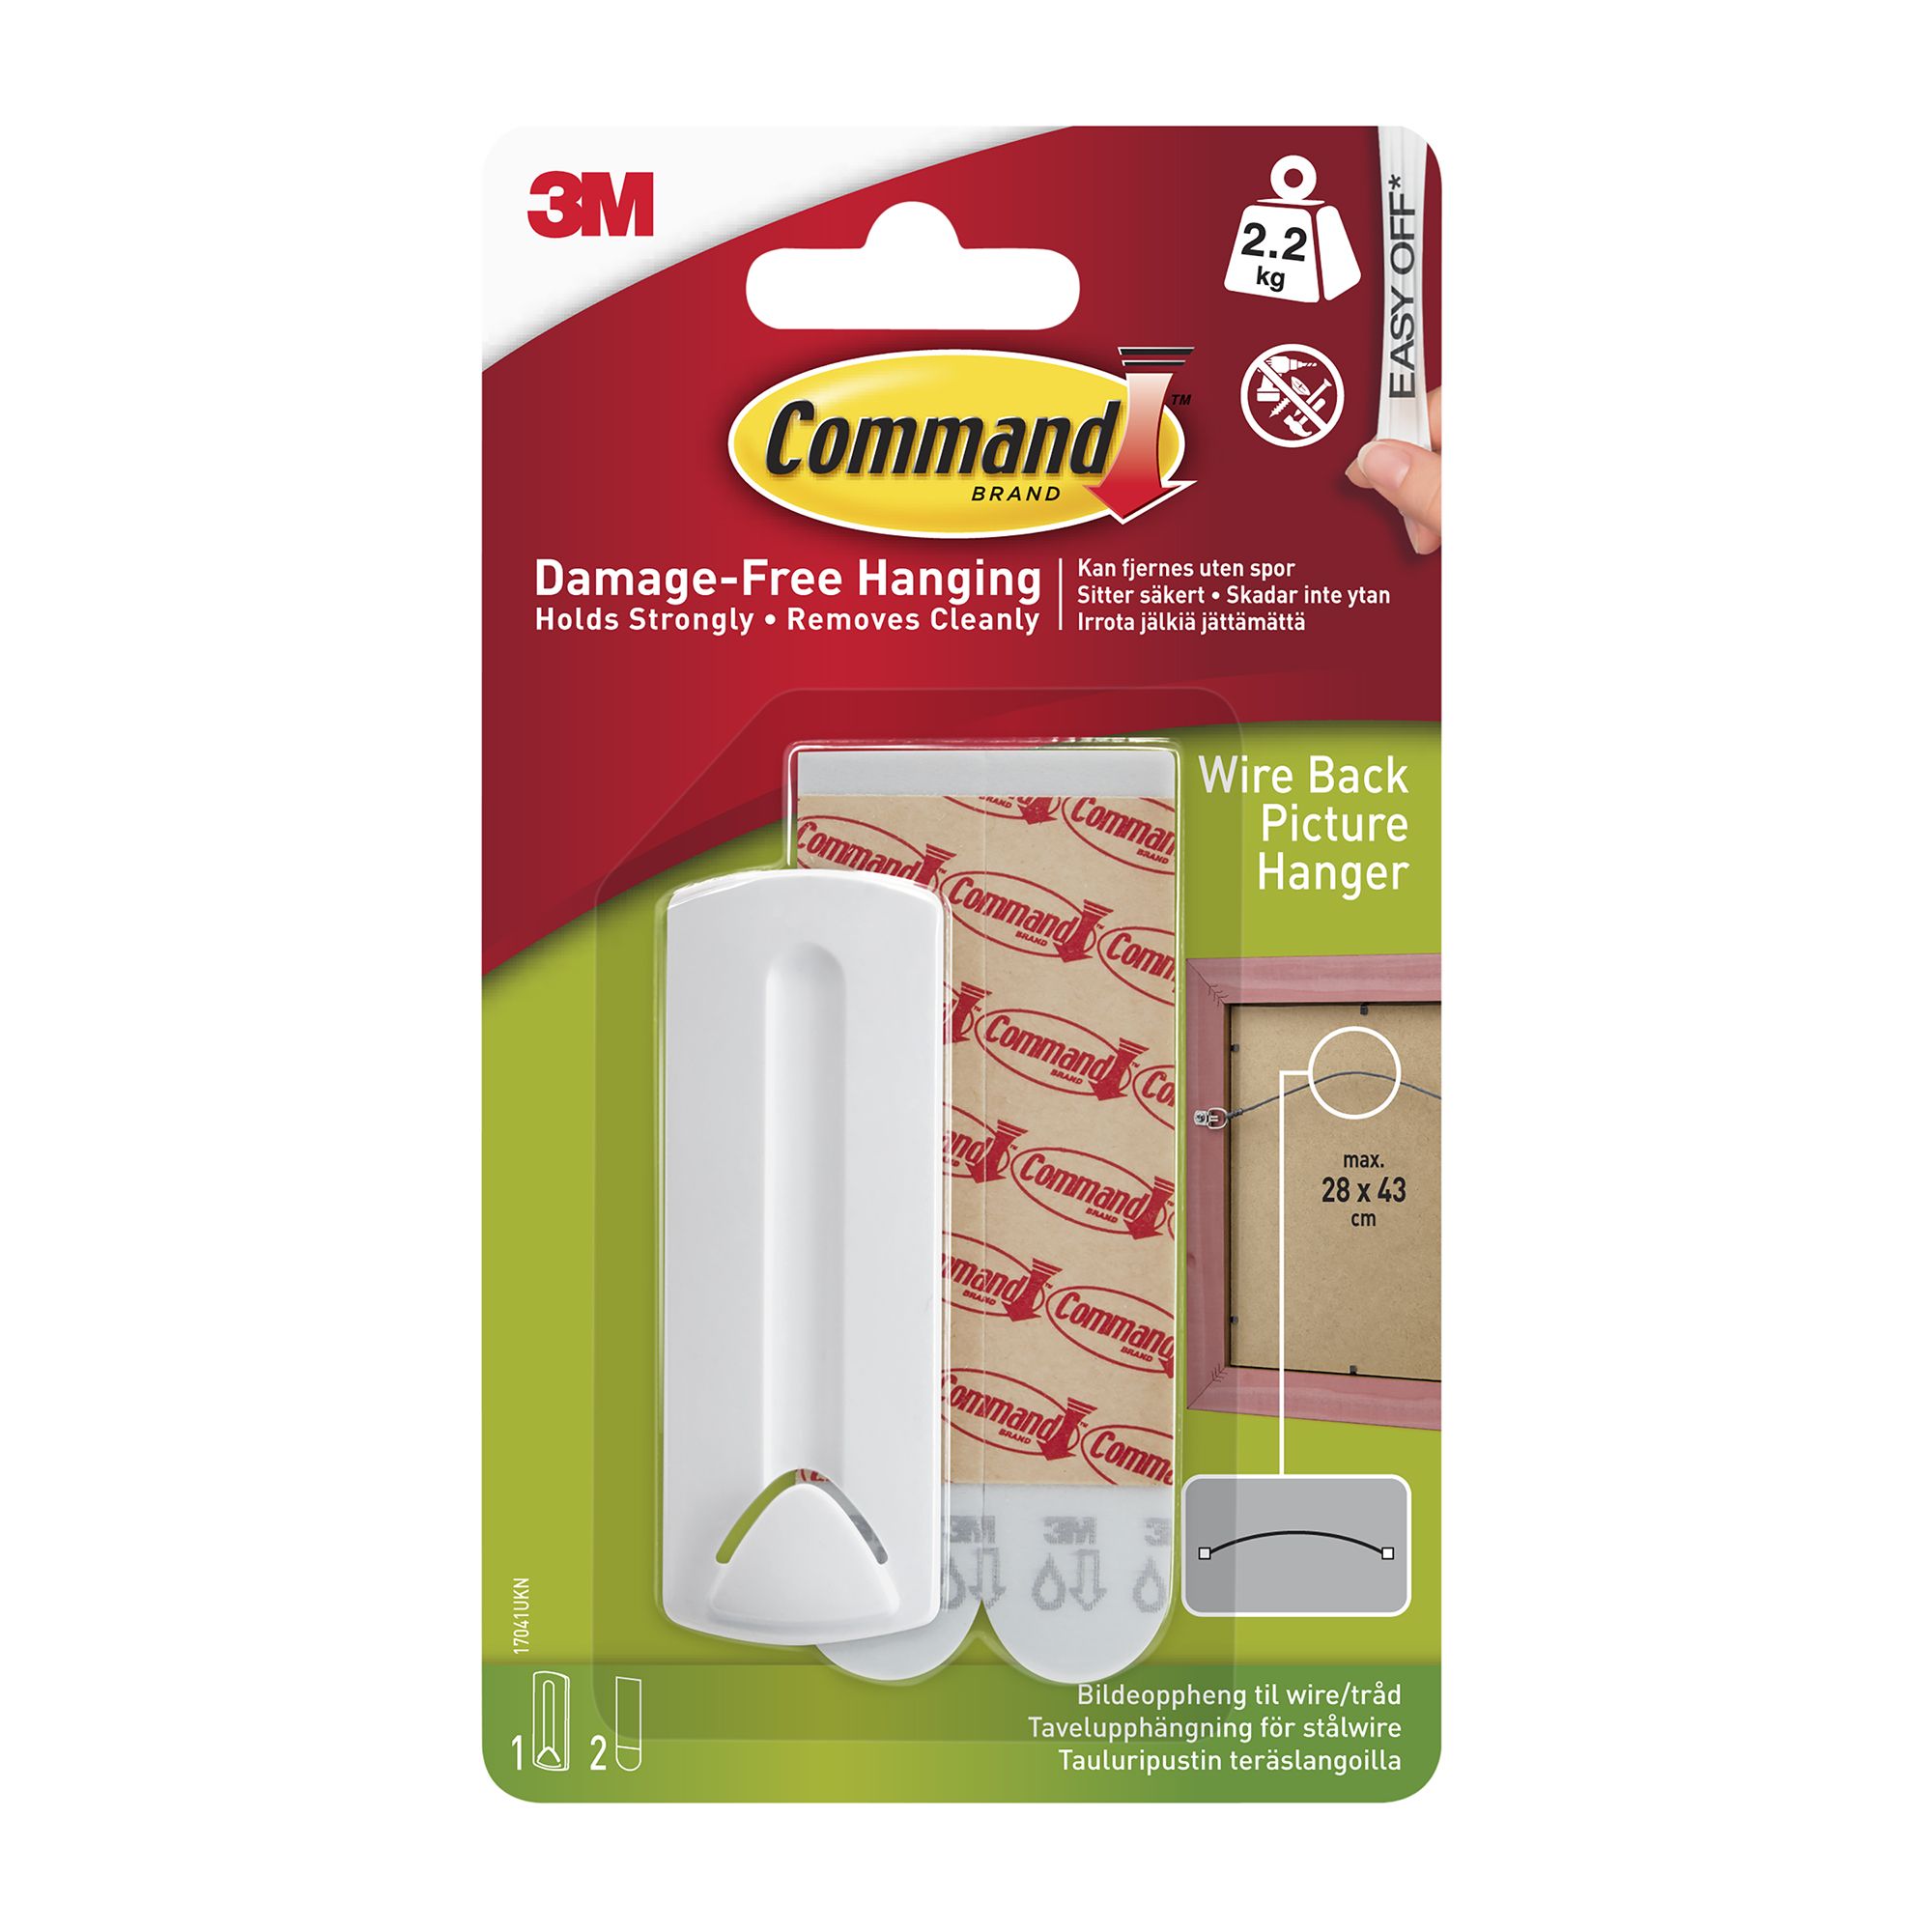 3M Command Wire Back White Picture hanging Canvas hanger (Holds)2.2kg